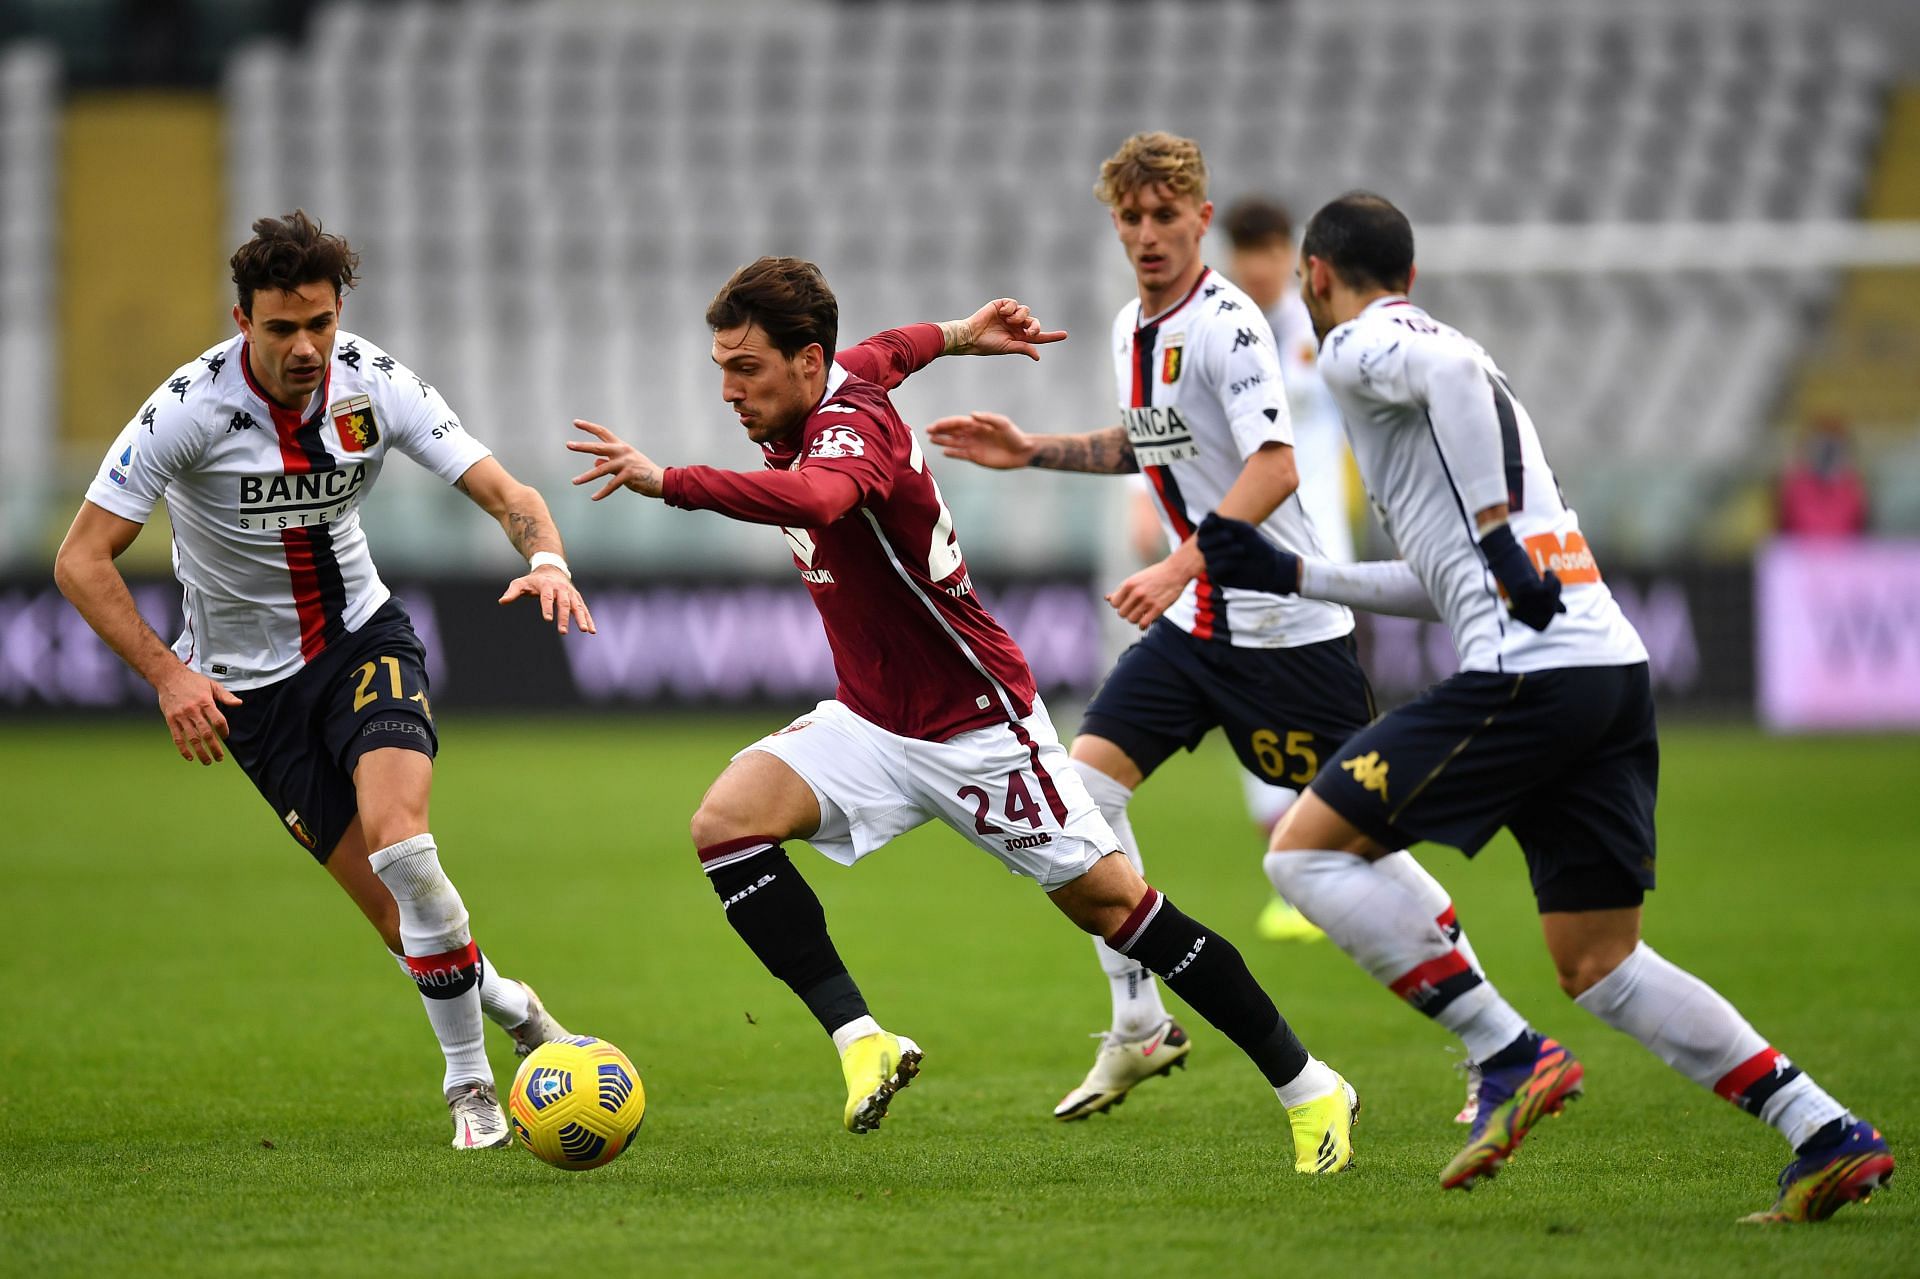 Genoa host Torino in their upcoming Serie A fixture on Friday